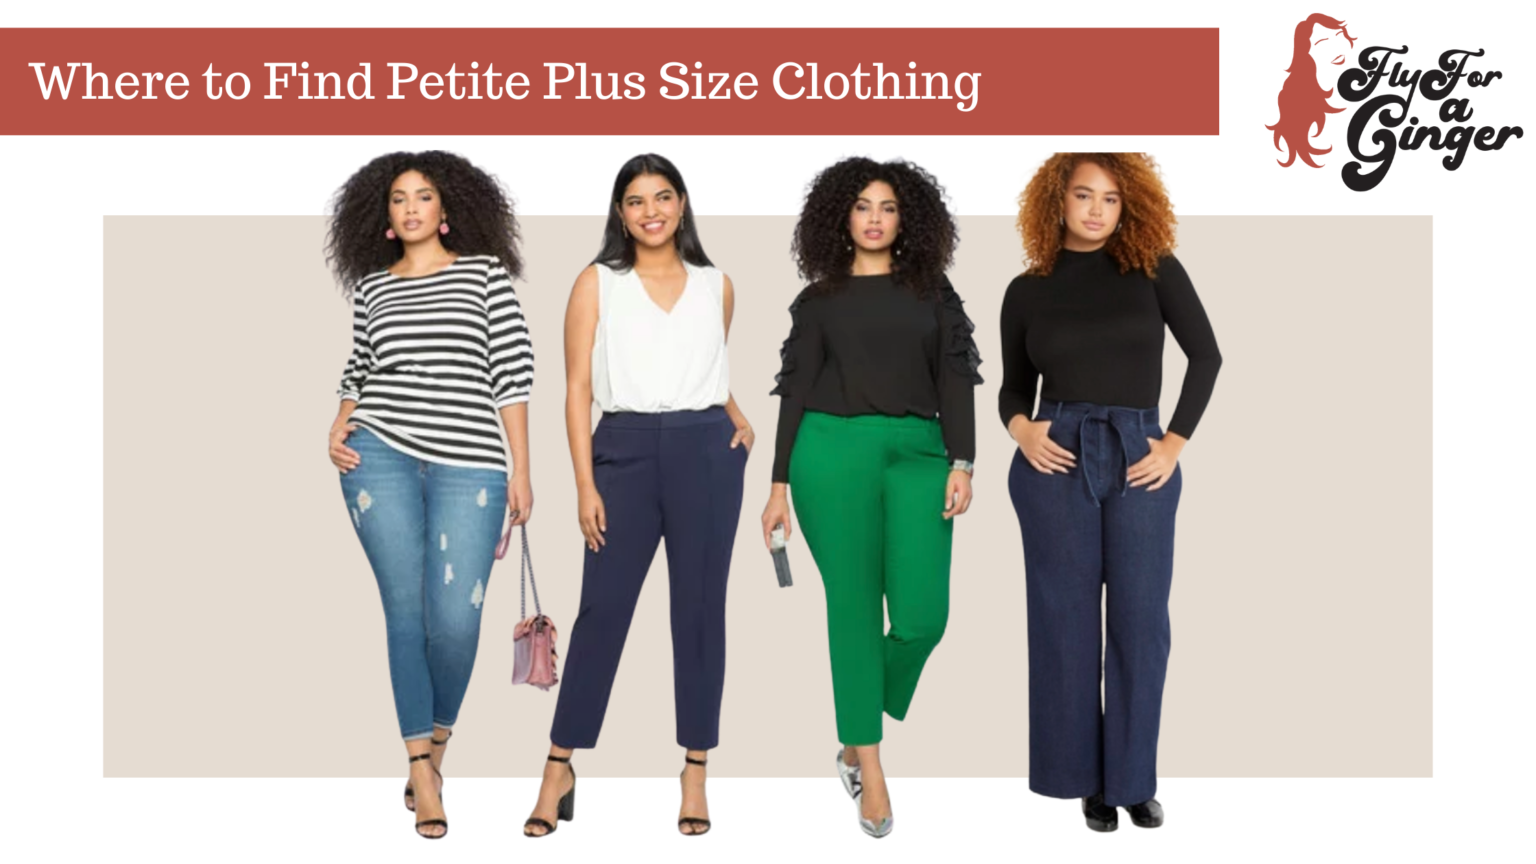 Where to Find Plus Size Petite Clothing